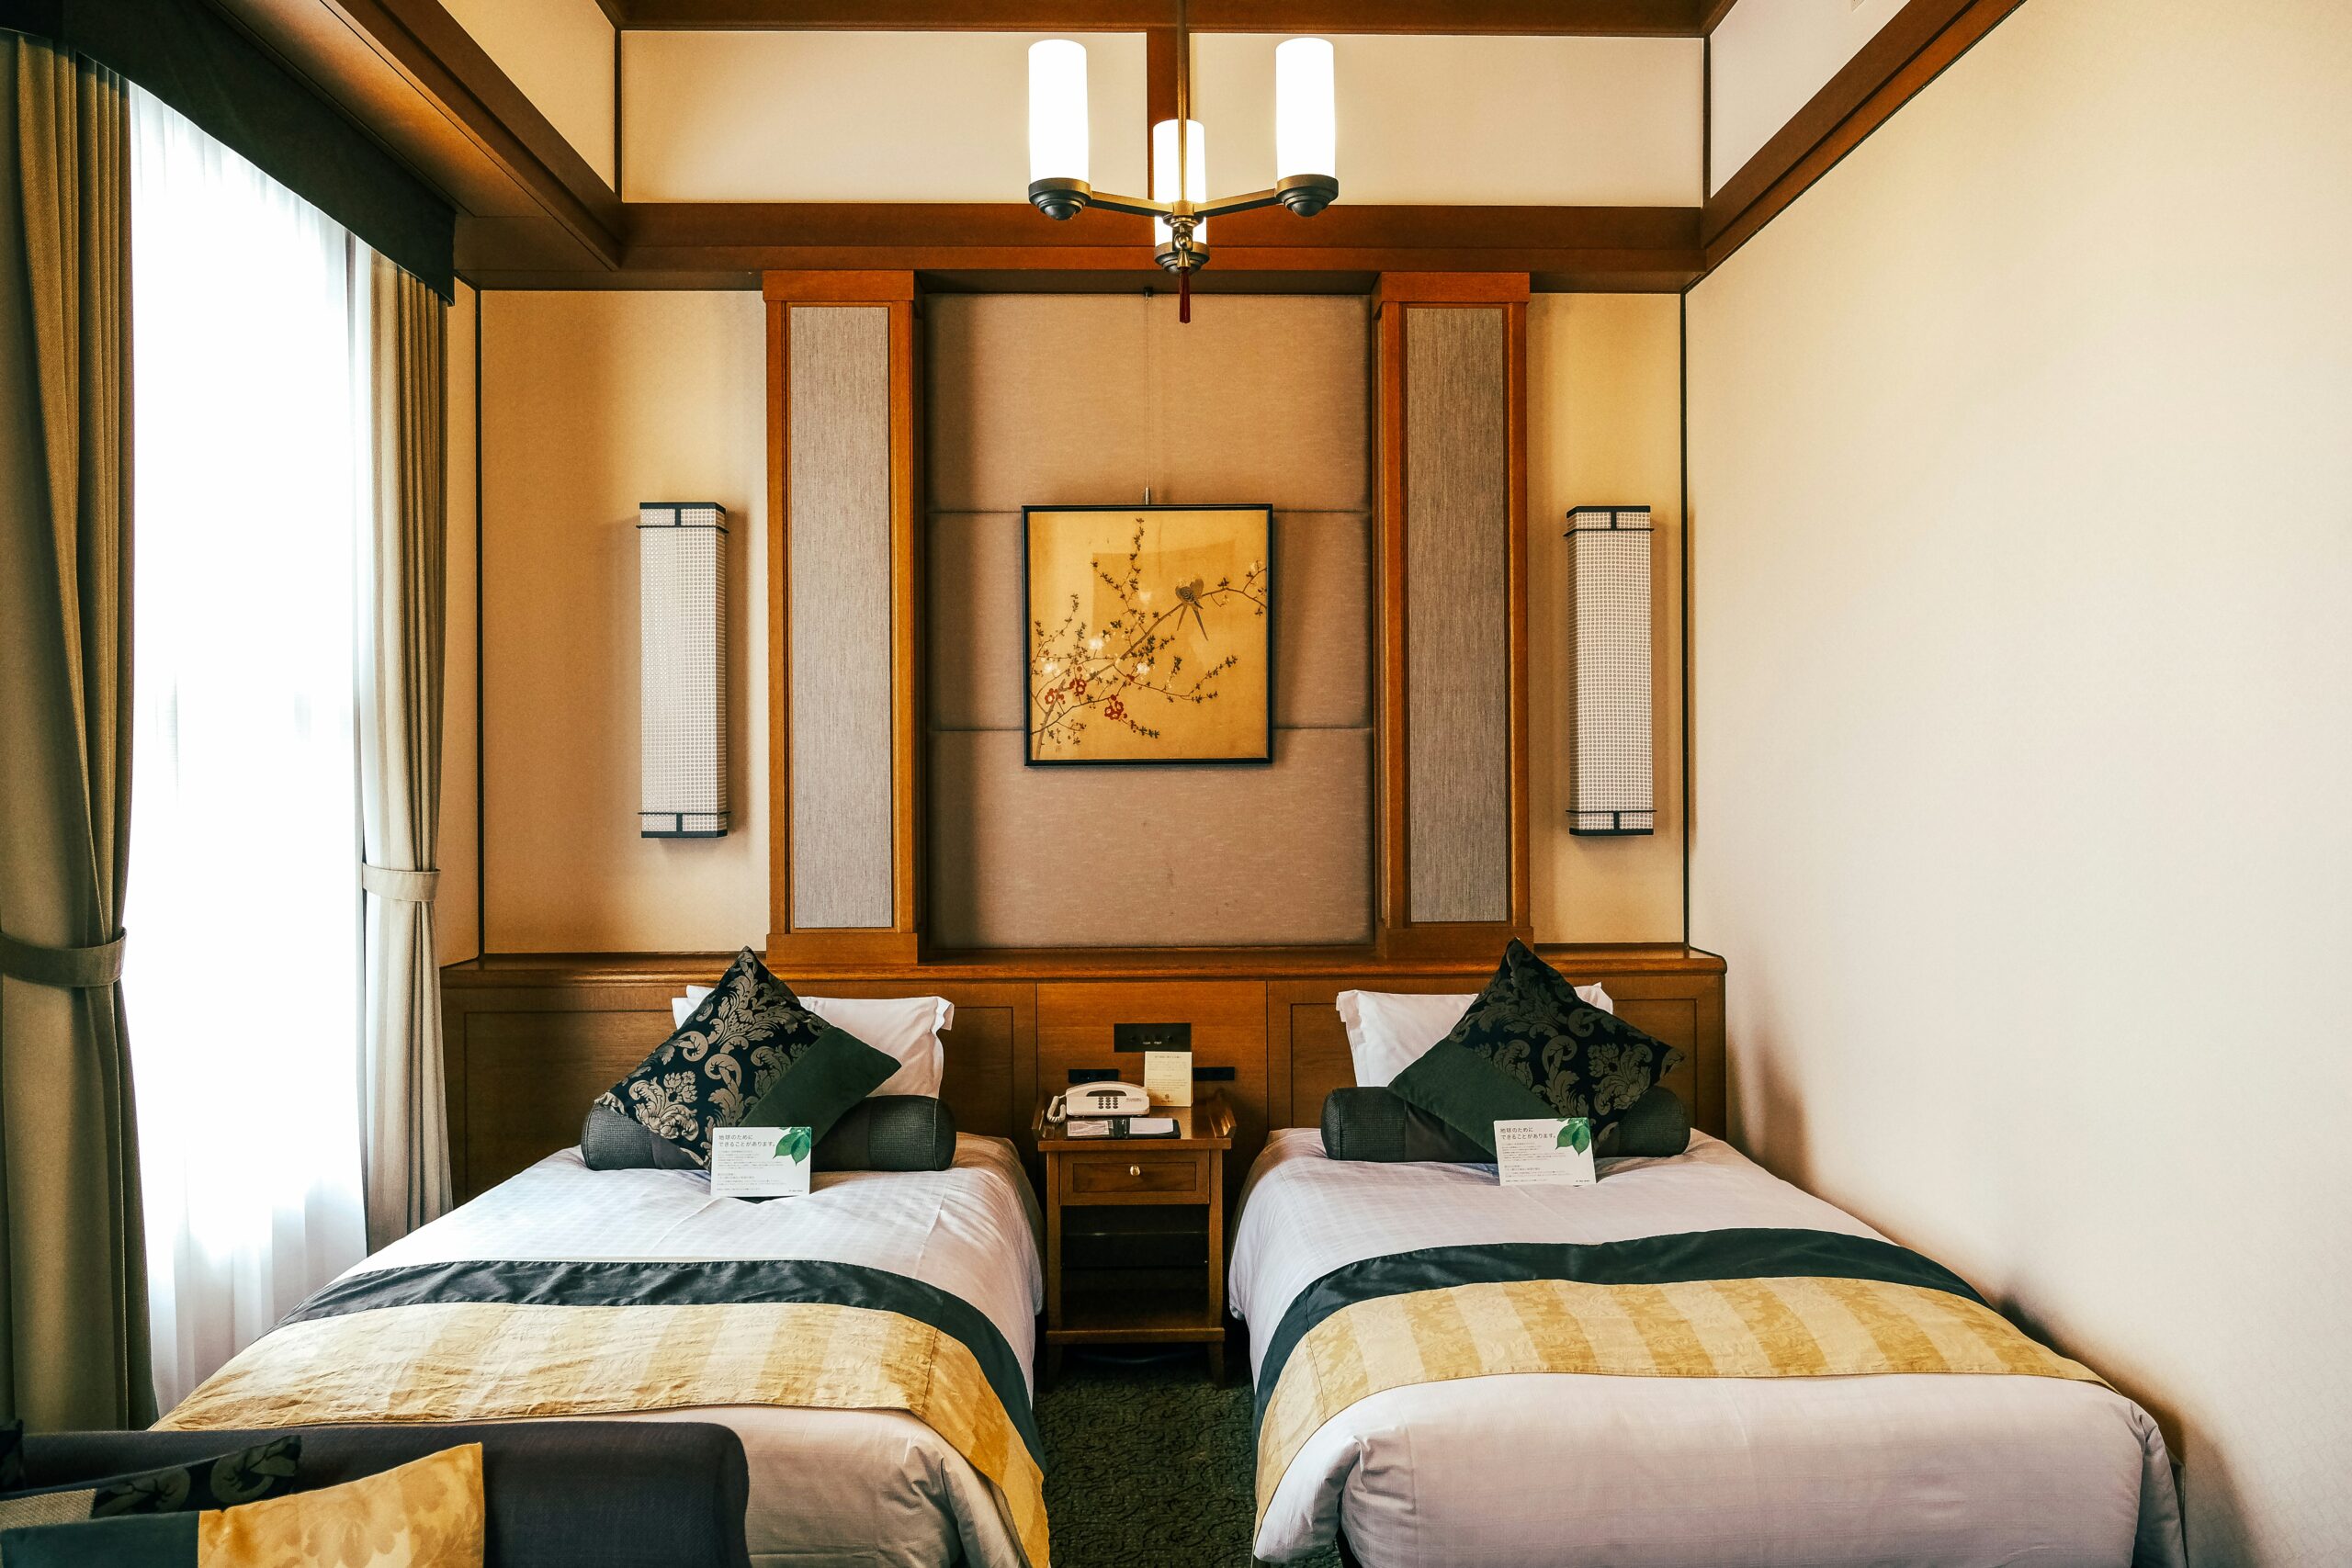 Akihabara is a anime cultural hub with many great accommodations to choose from. 
pictured: a modern Japanese hotel room with natural lighting and two twin sized beds